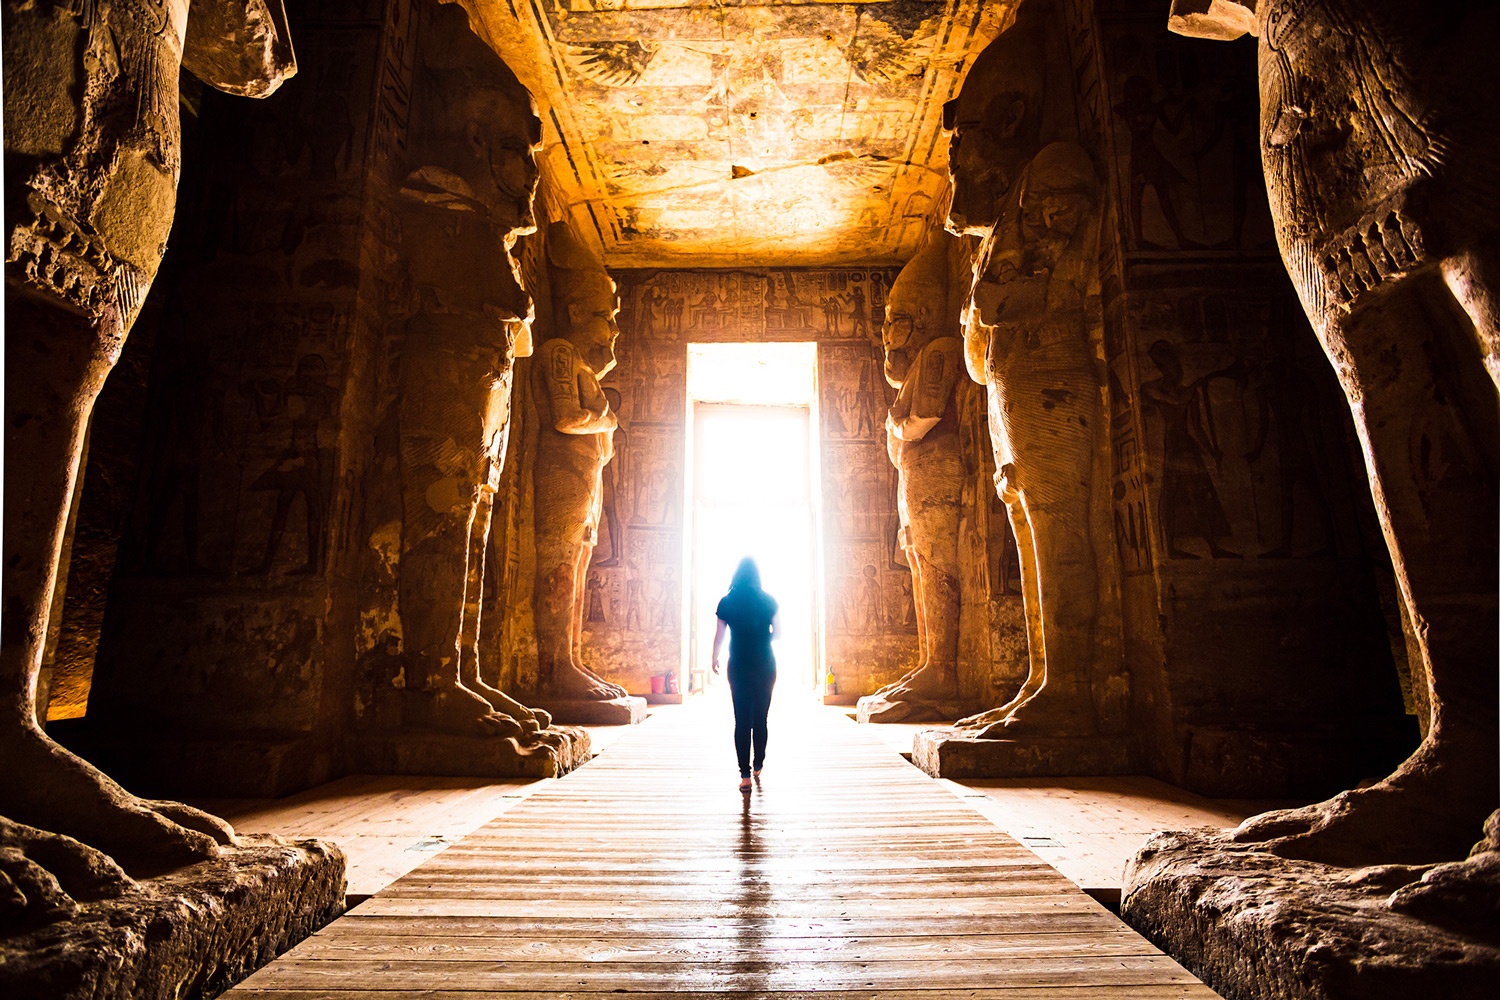 Things you wish you knew before your trip to Egypt